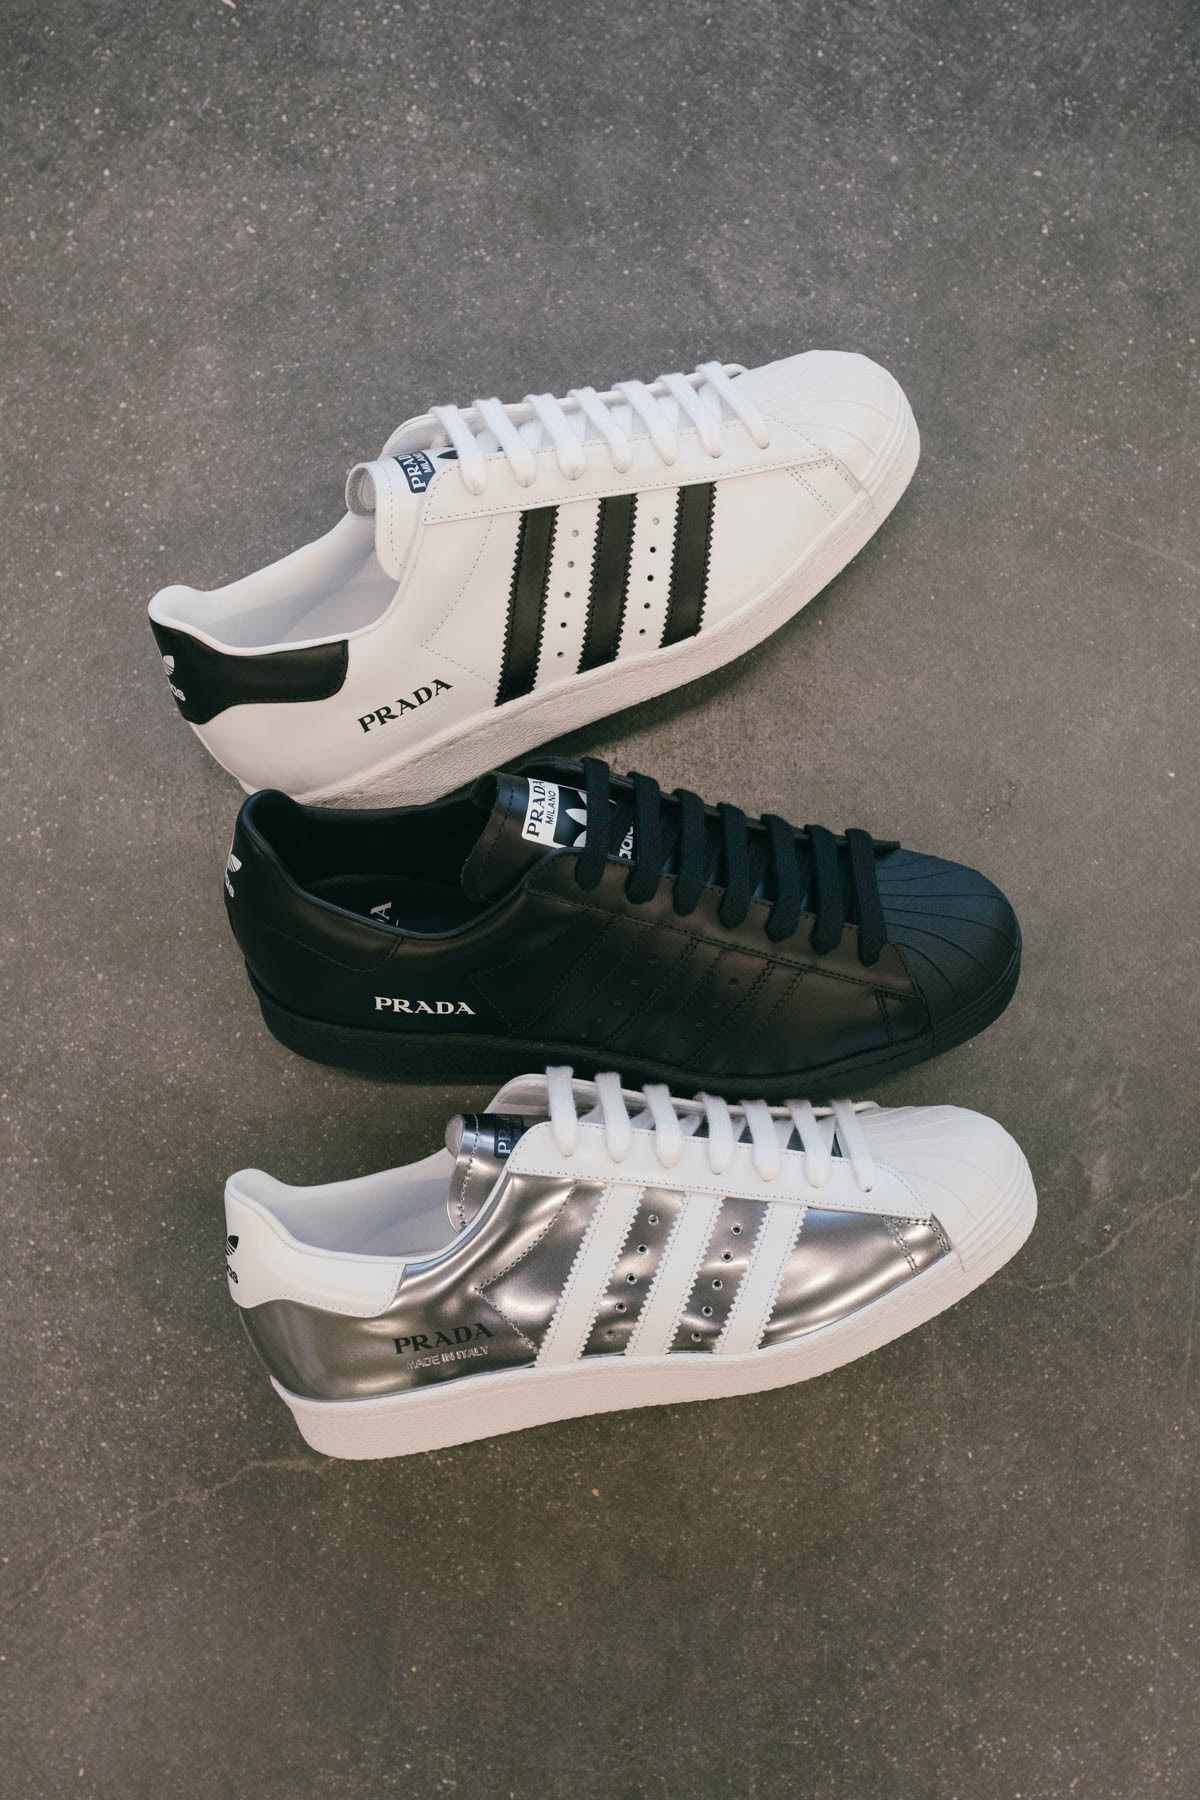 Why the Prada x adidas Superstar Costs $500 & We're Not Mad At It